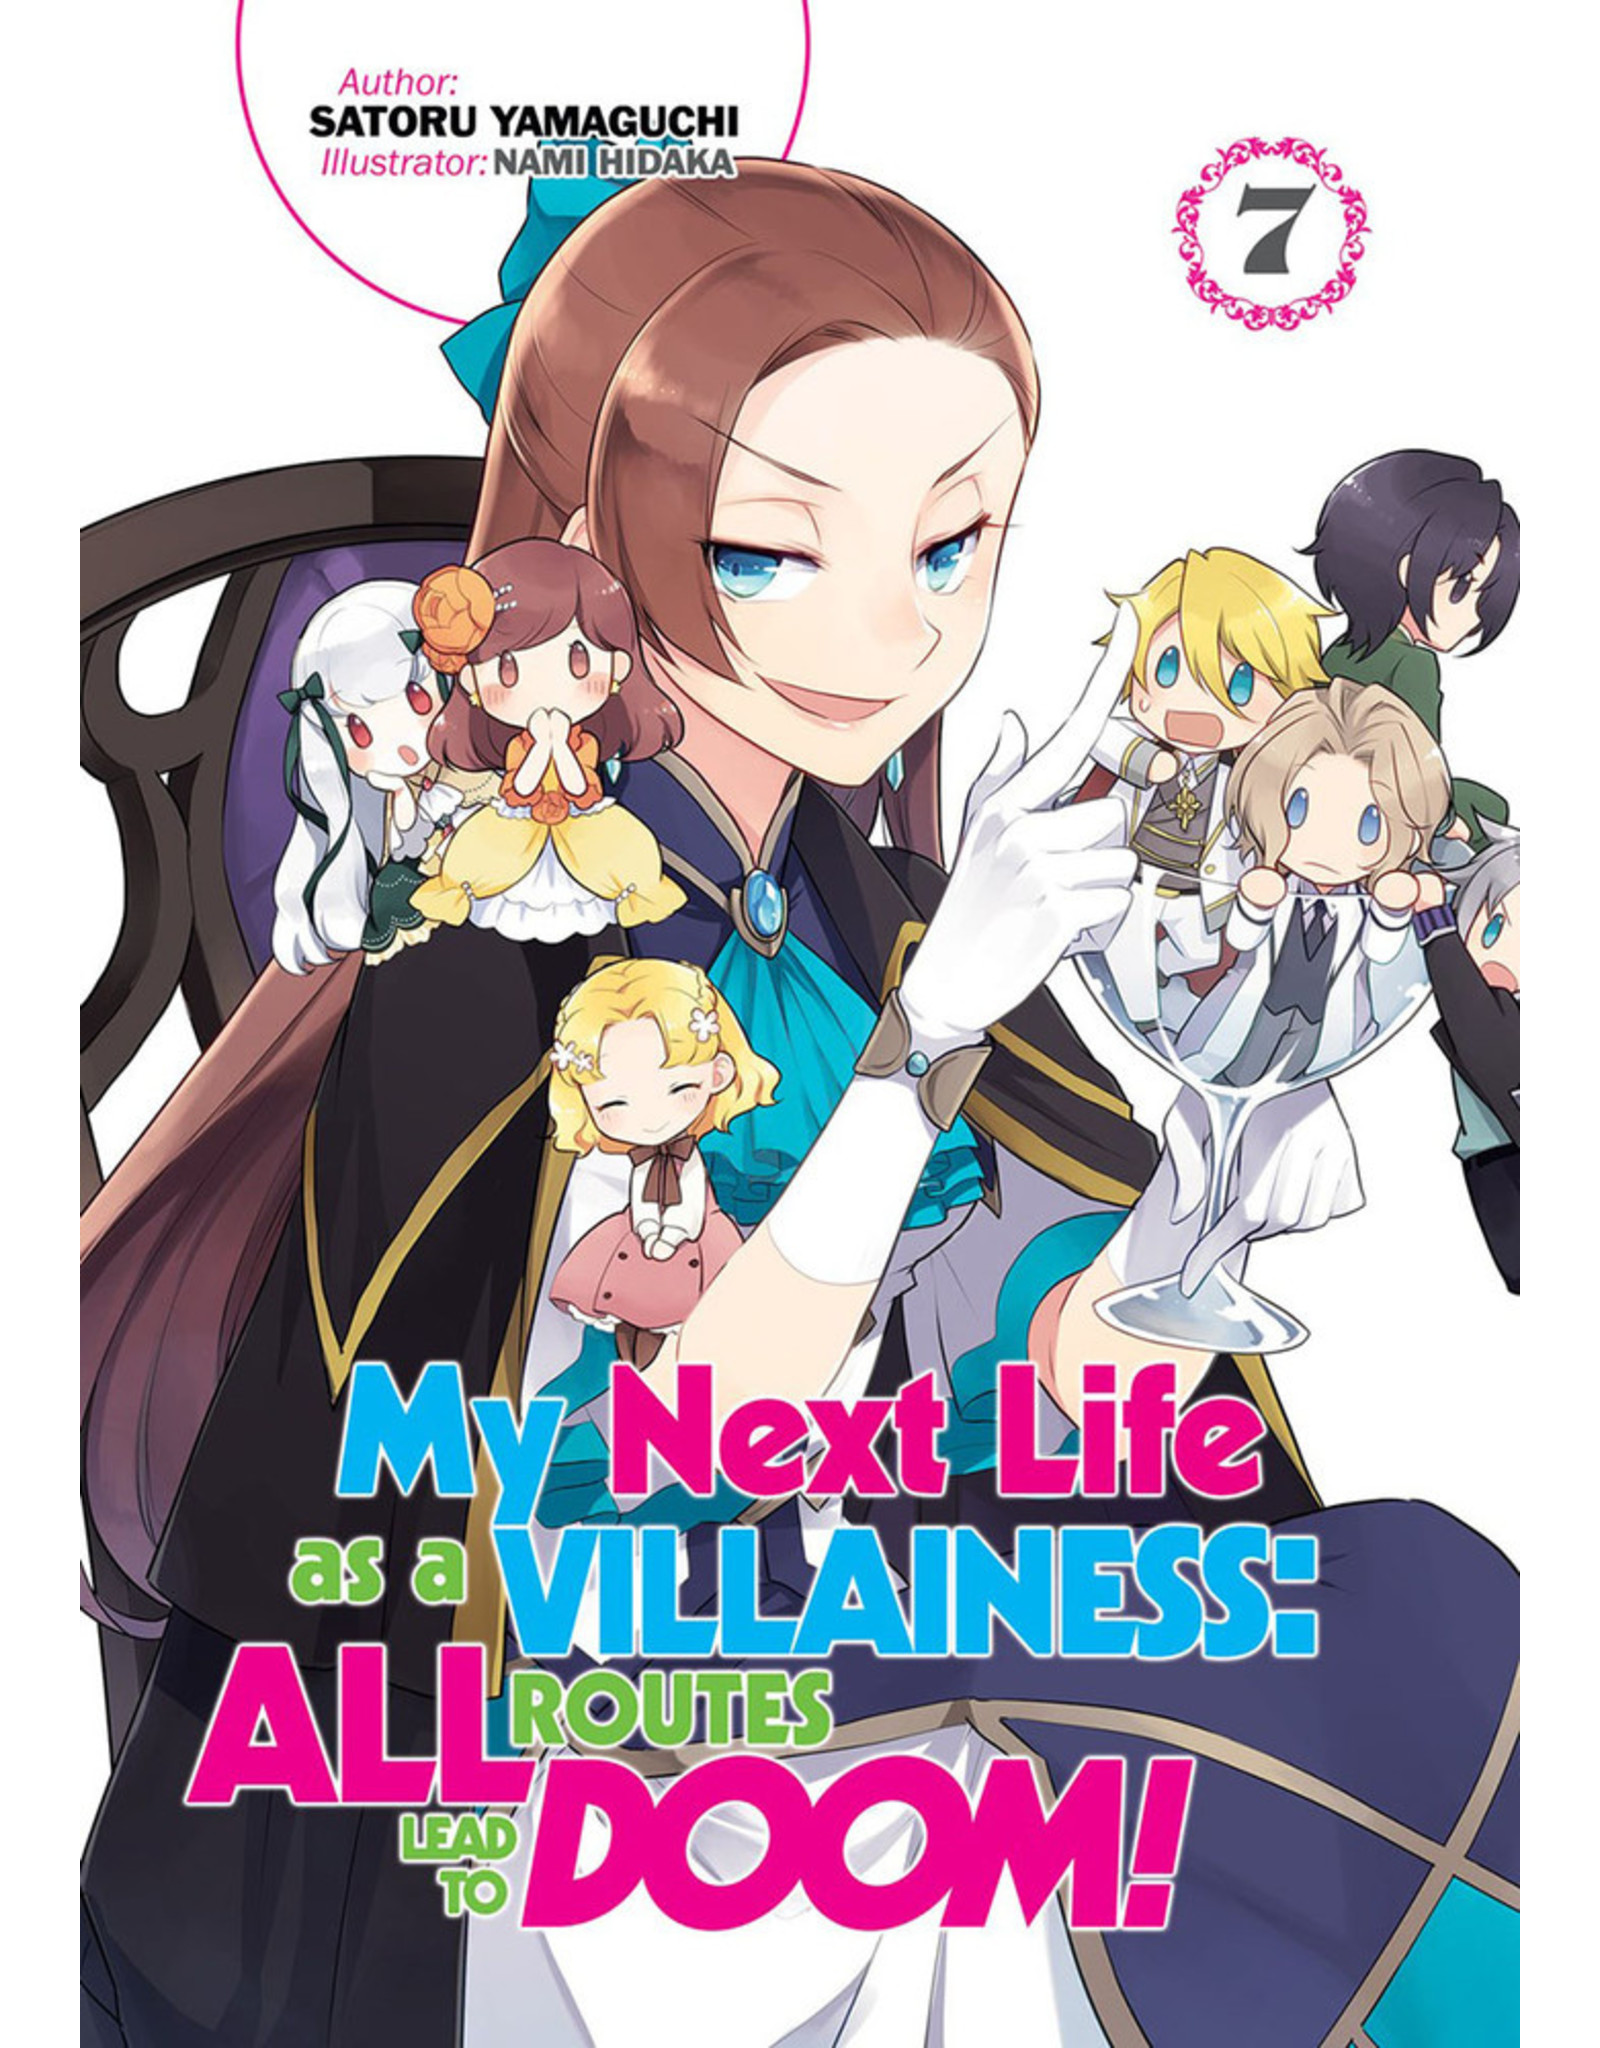 J-Novel Club My Next Life As a Villainess: All Routes Lead To Doom! vol. 7 Novel